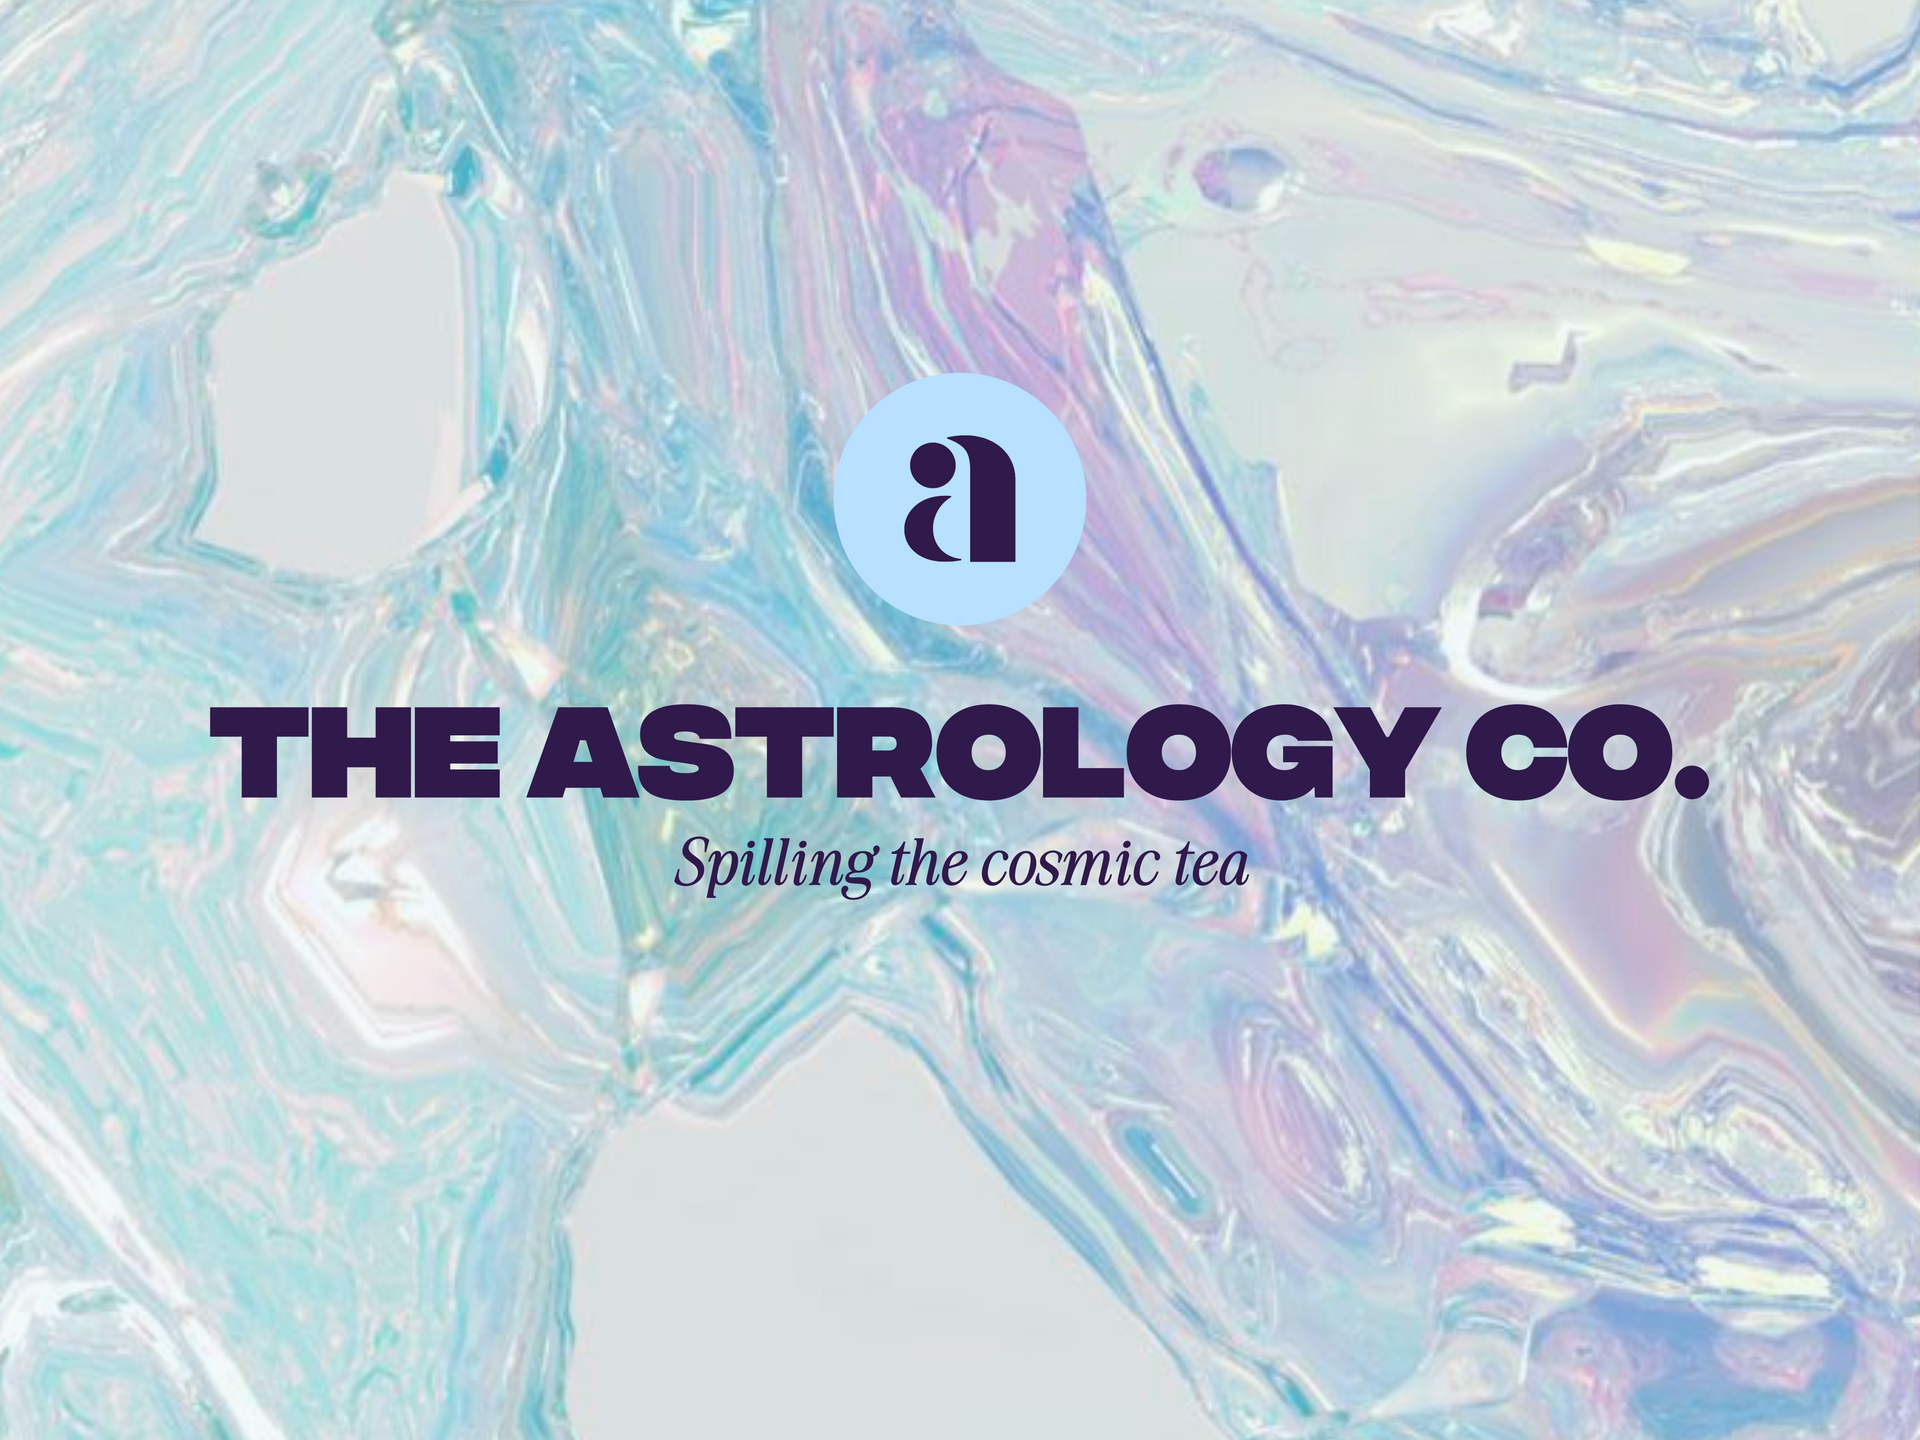 BRAND IDENTITY: The Astrology Co.